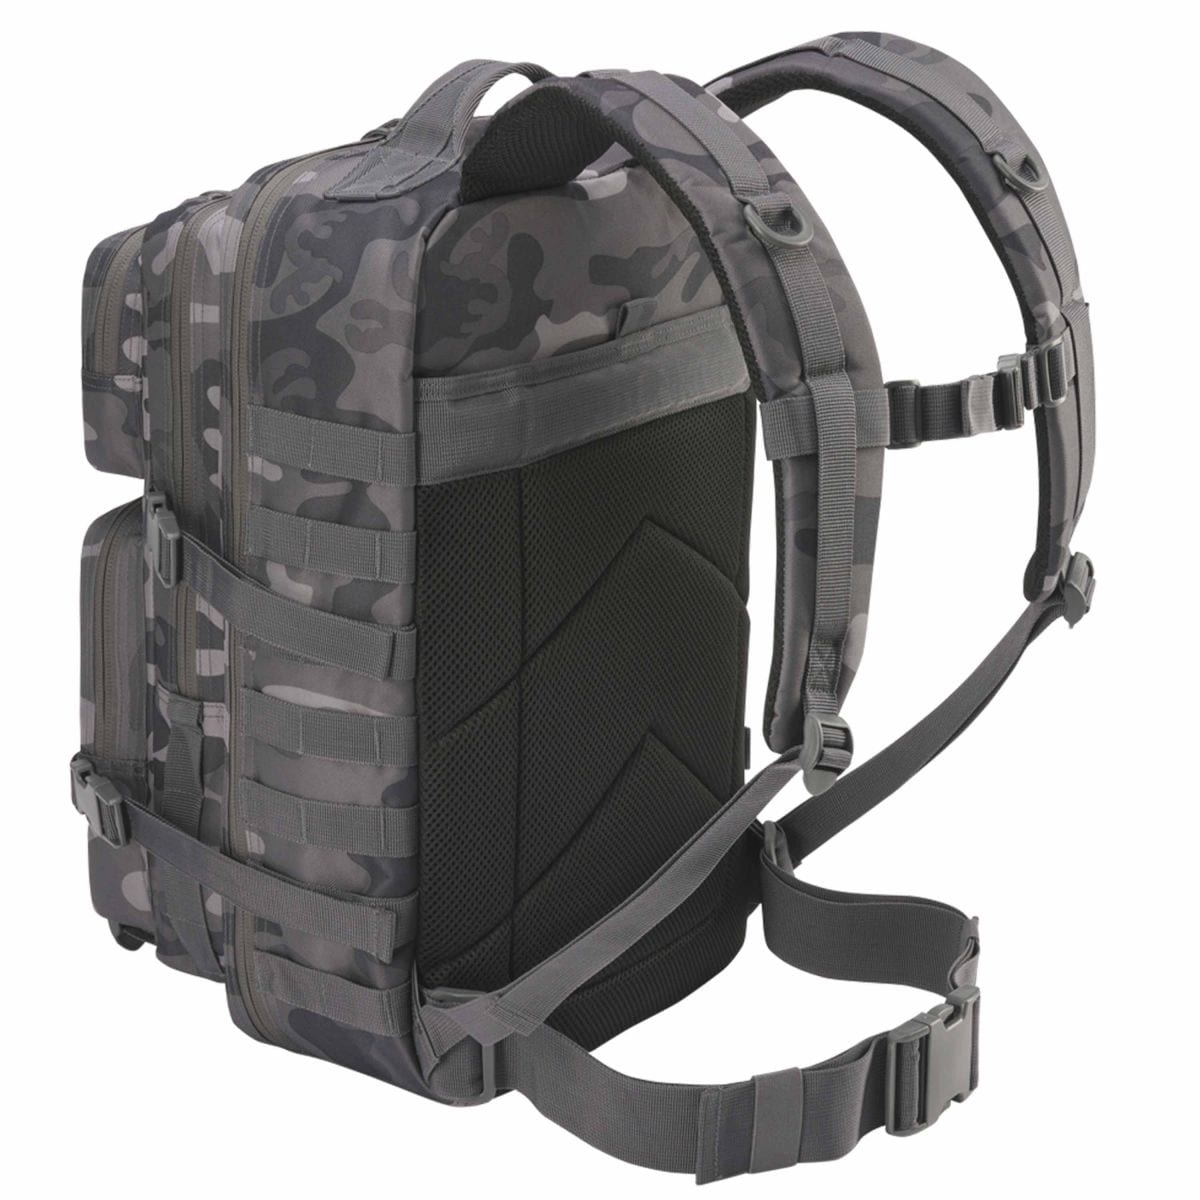 Purchase the Brandit US Cooper Backpack Large grey camo by ASMC